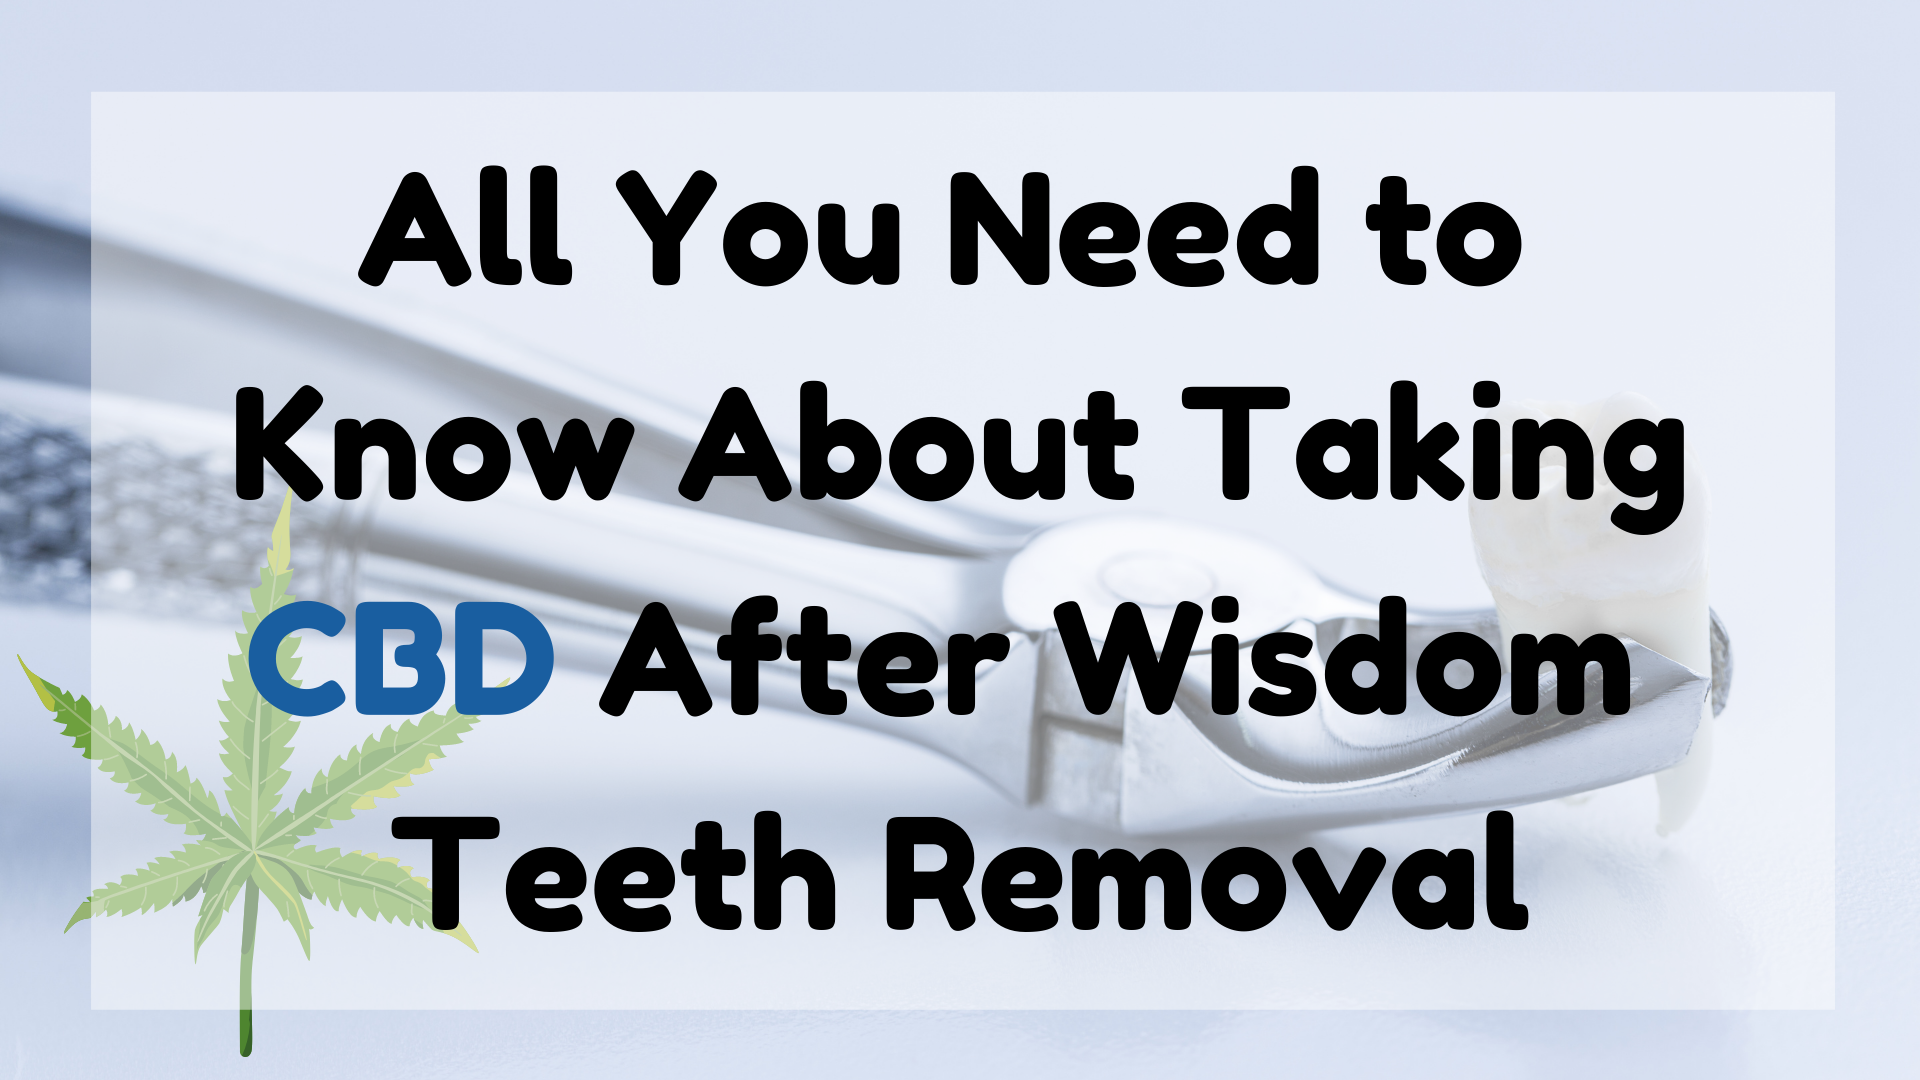 All You Need to Know About Taking CBD After Wisdom Teeth Removal